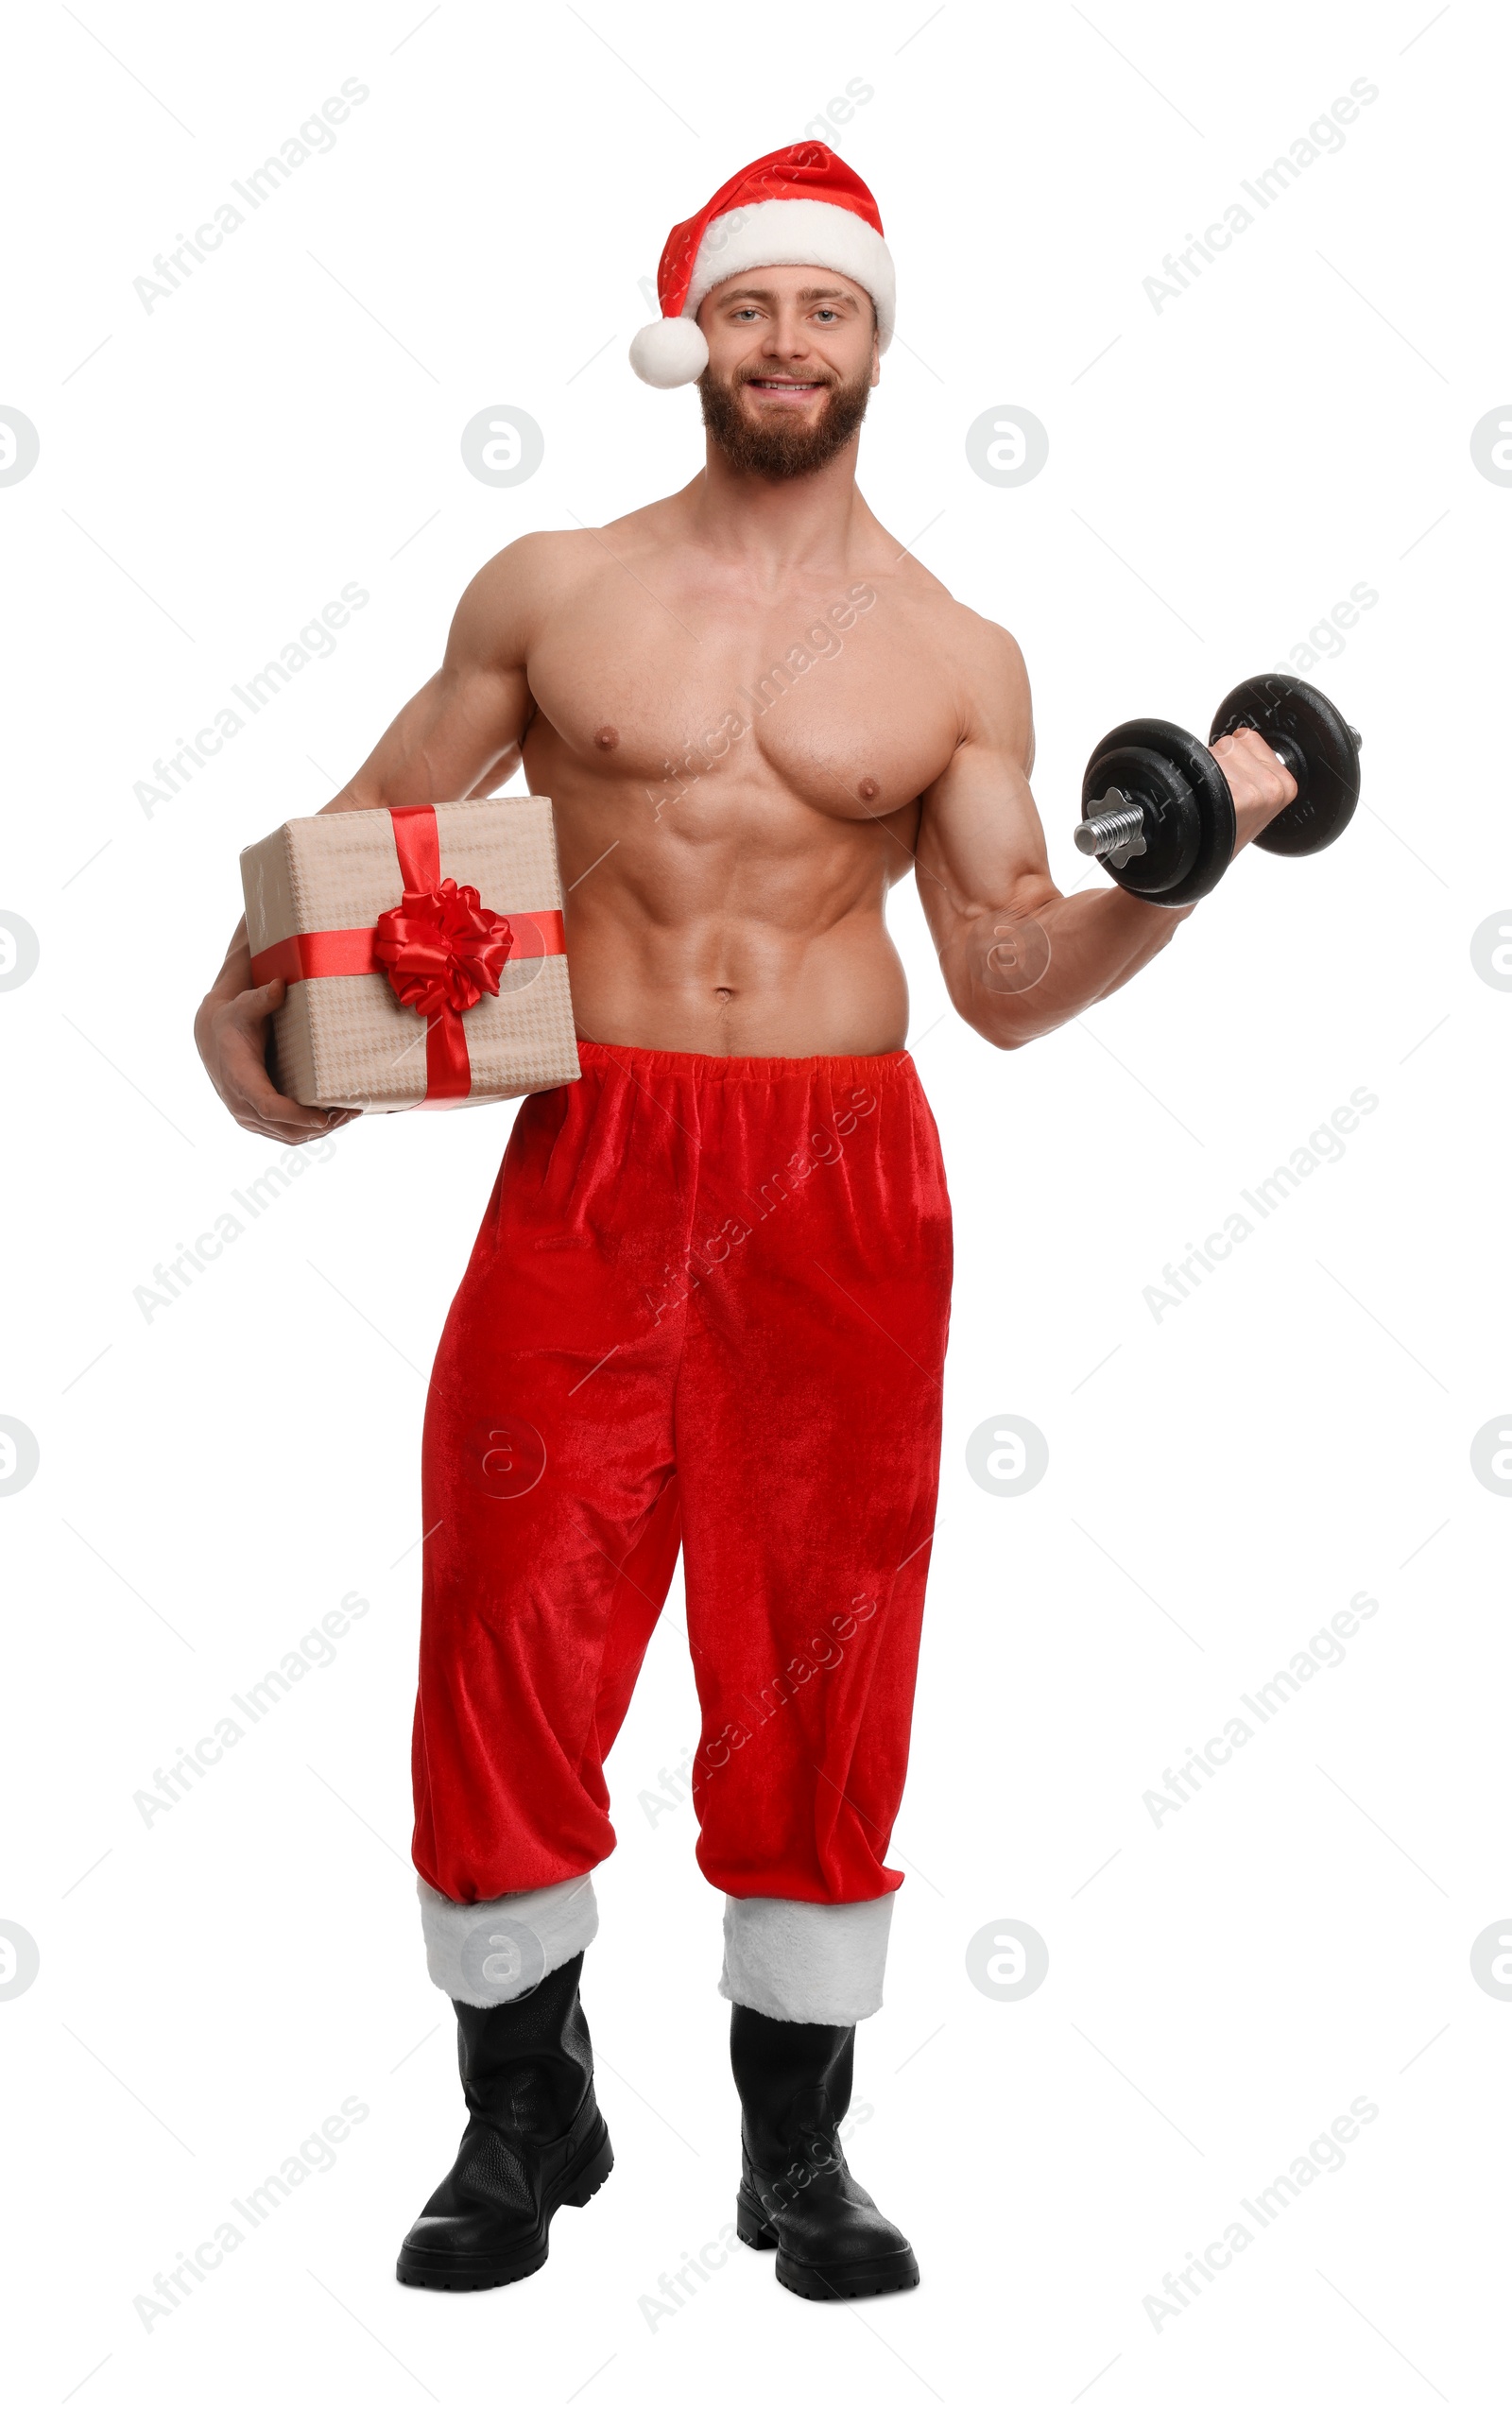 Photo of Attractive young man with muscular body in Santa hat holding Christmas gift box and dumbbell on white background